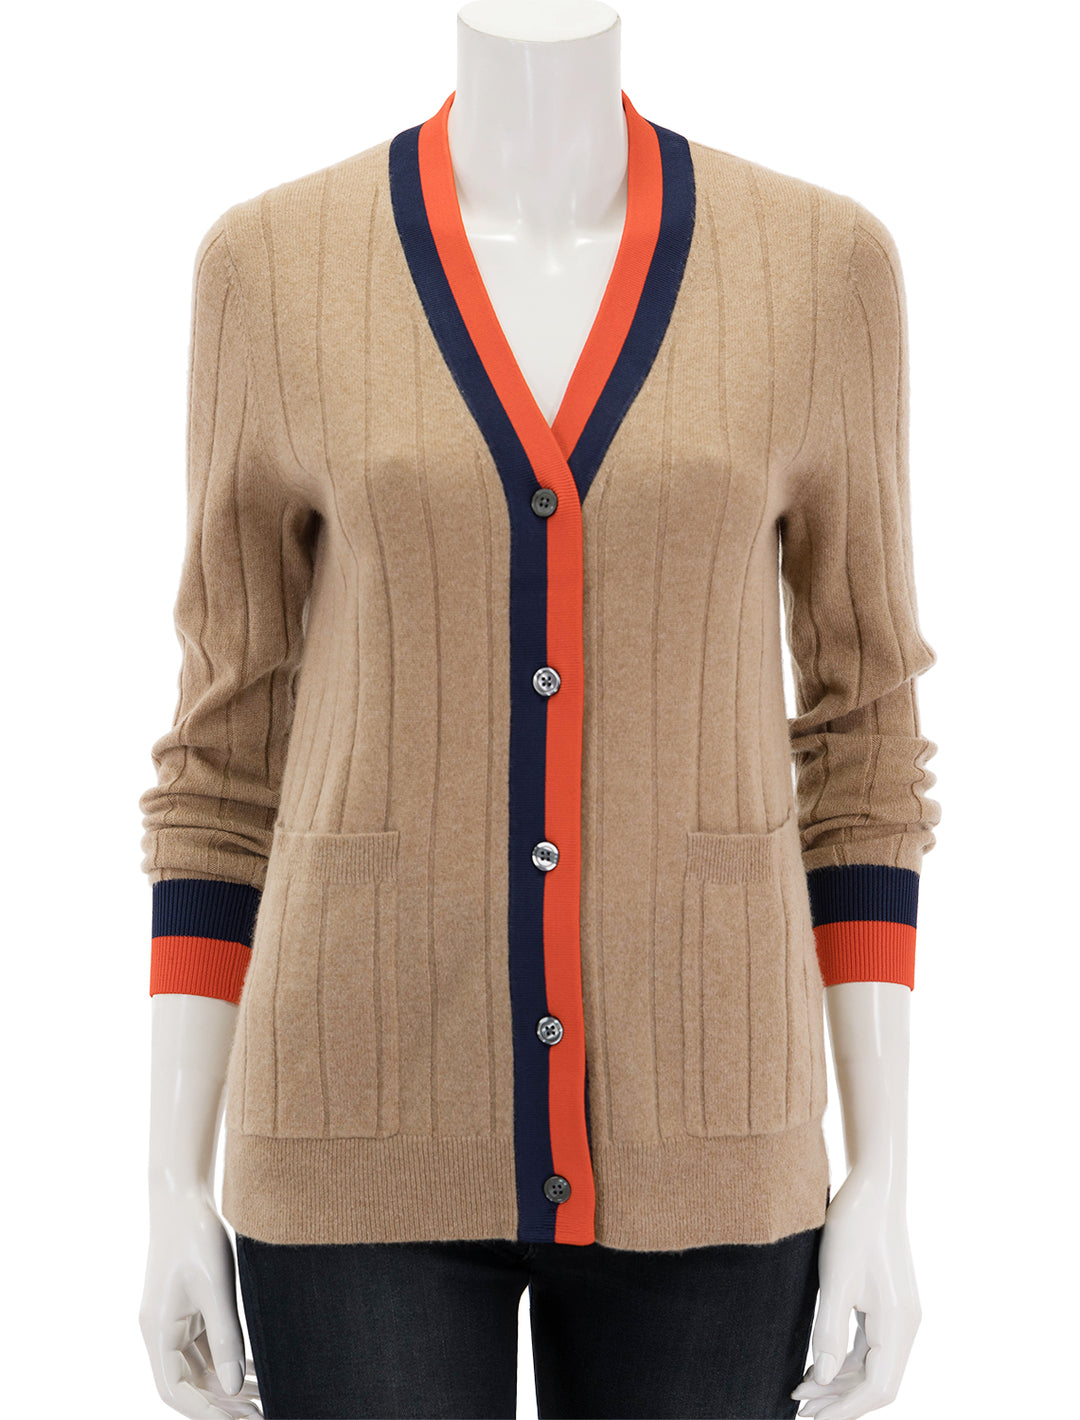 Front view of KULE's sinclair cardi in camel.